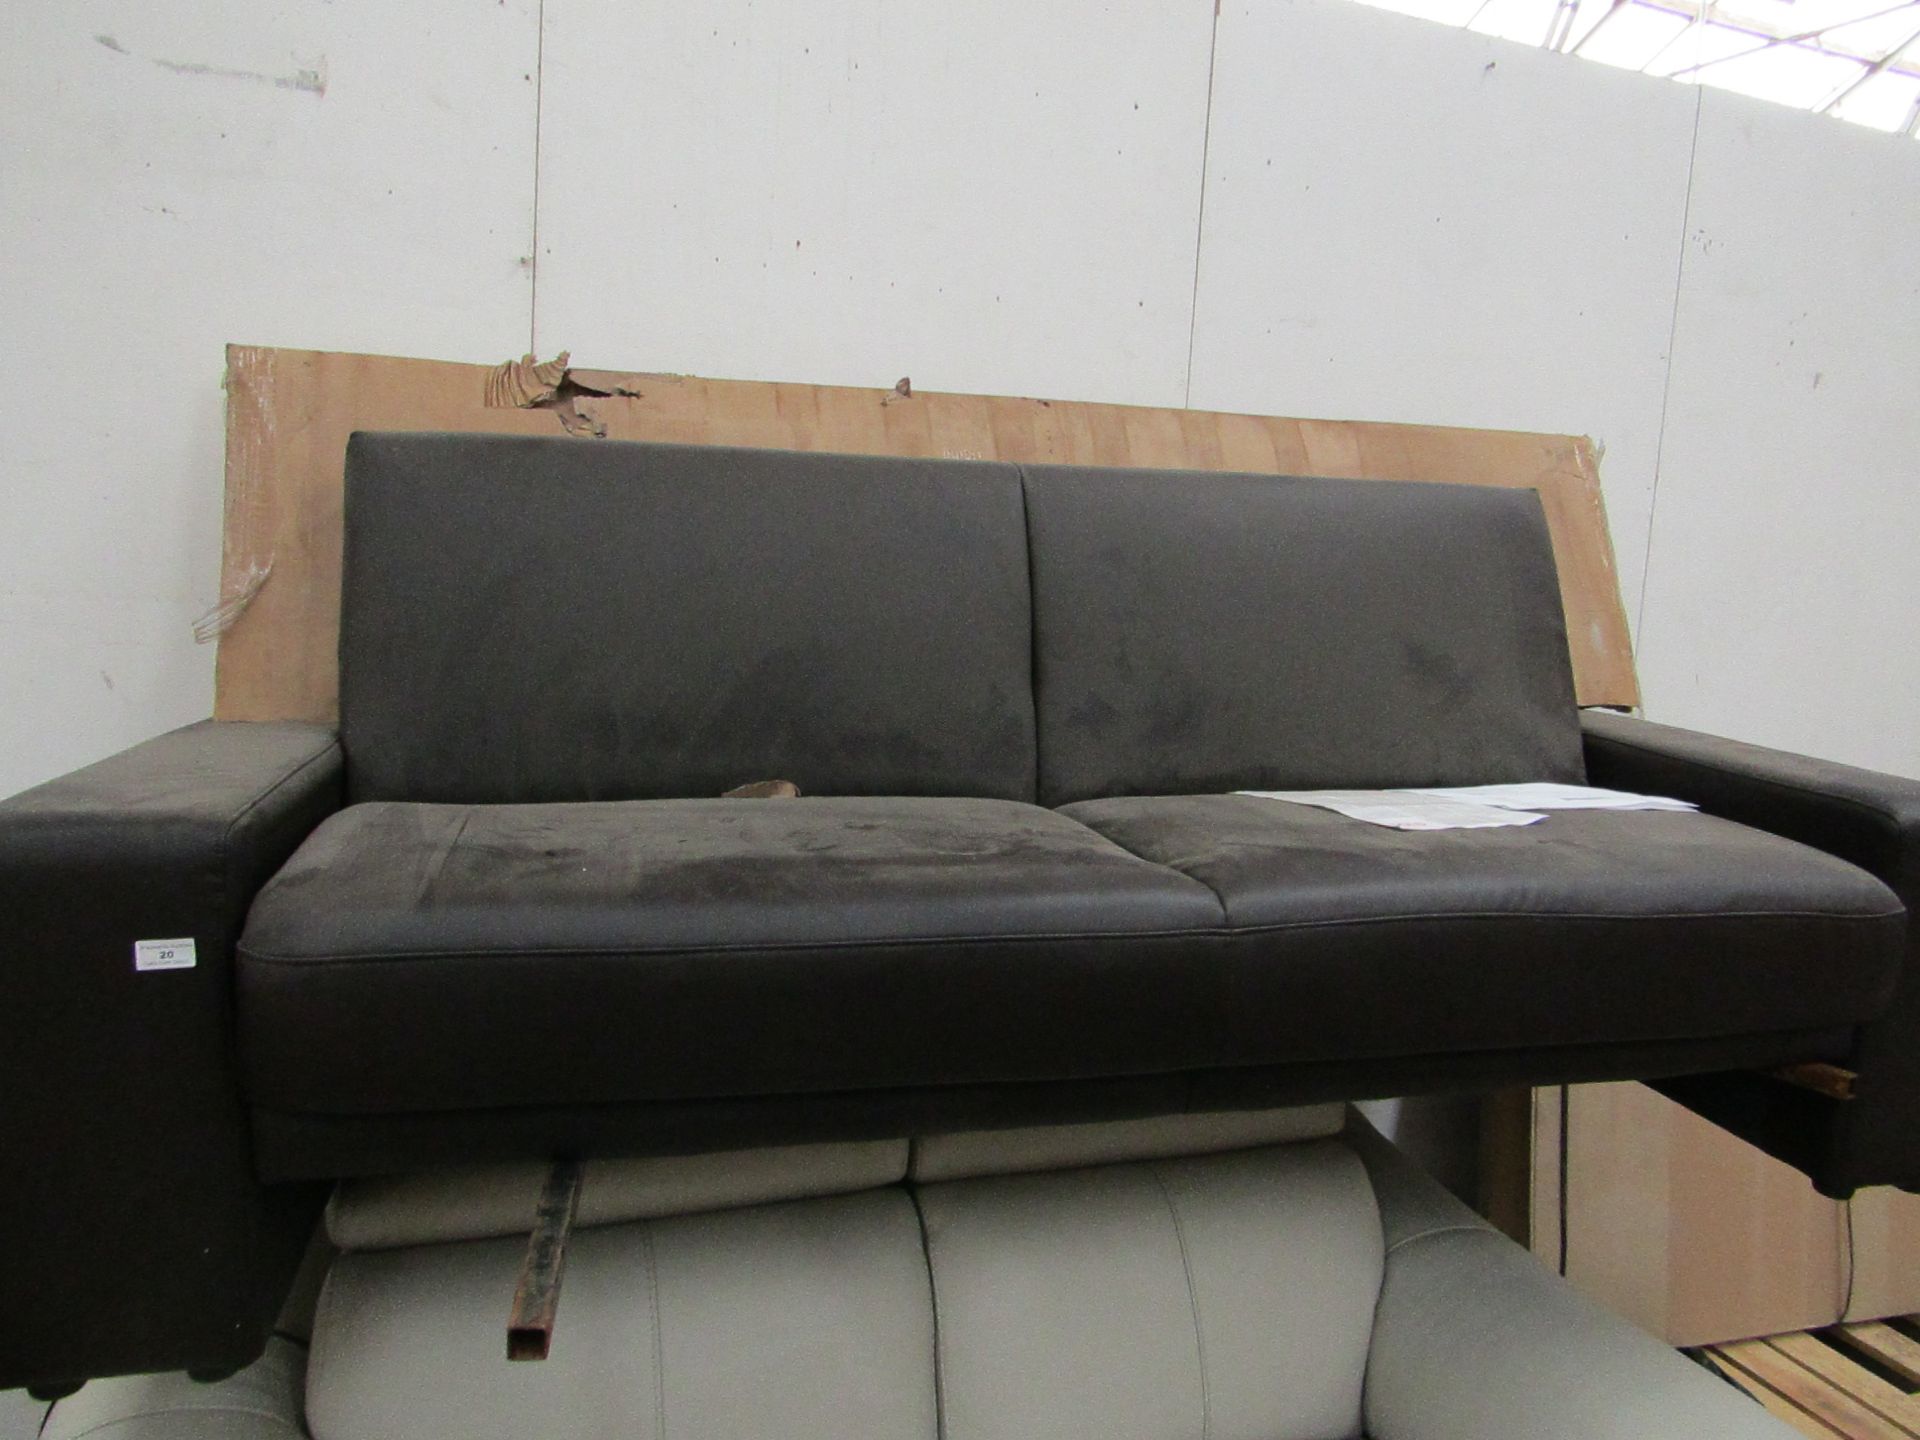 2 Seater Fold down back sofa bed, mechanism is working correctly.